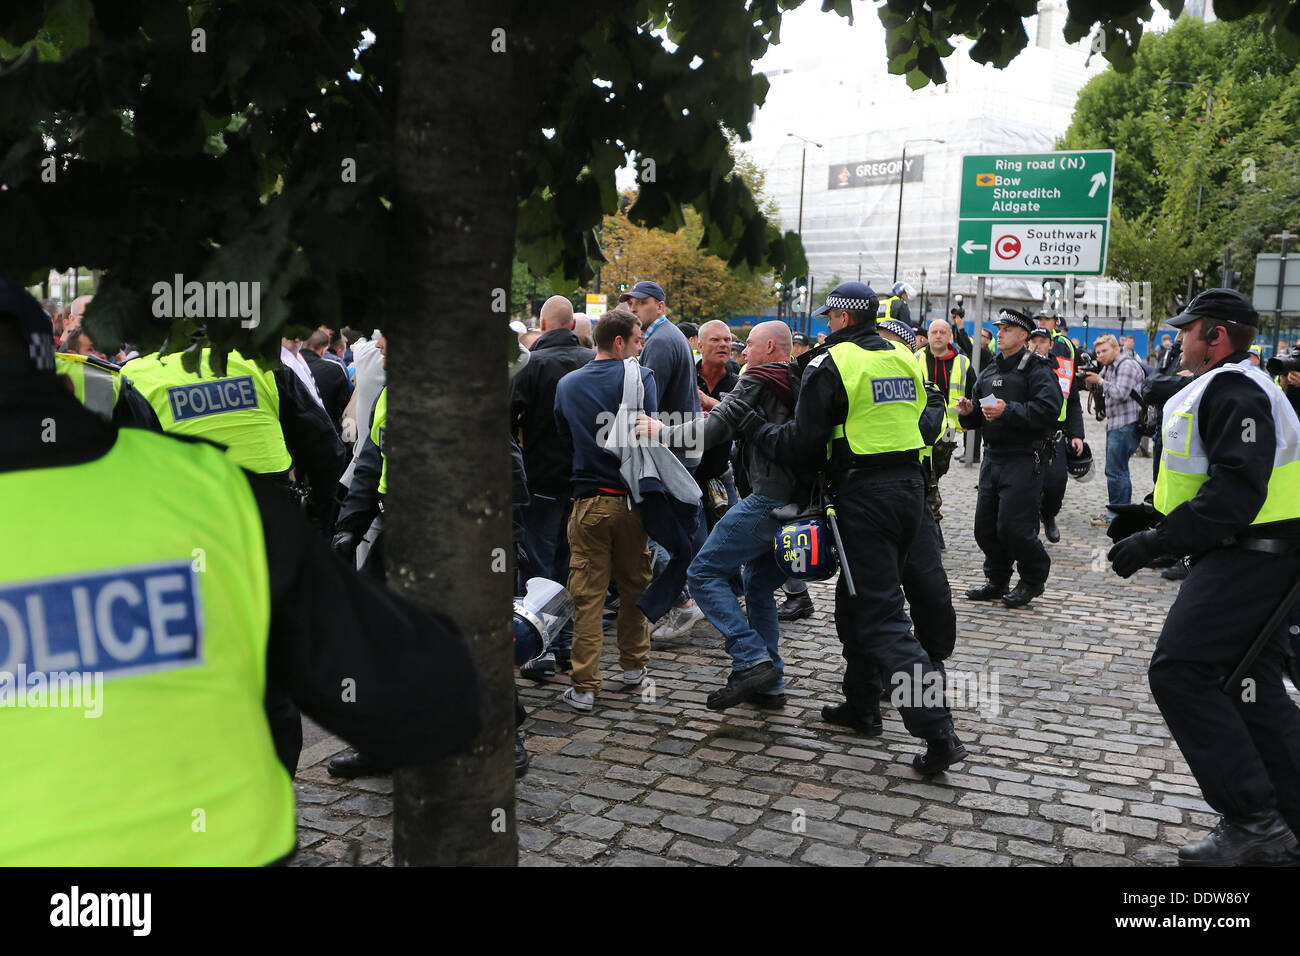 London, UK. 7th September 2013. The Right-Wing Pressure Group, The English Defence League, March and rally against Sharia law on the outskirts of Tower Hamlets. London, United Kingdom, 07/09/2013  Credit:  Mario Mitsis / Alamy Live News Stock Photo